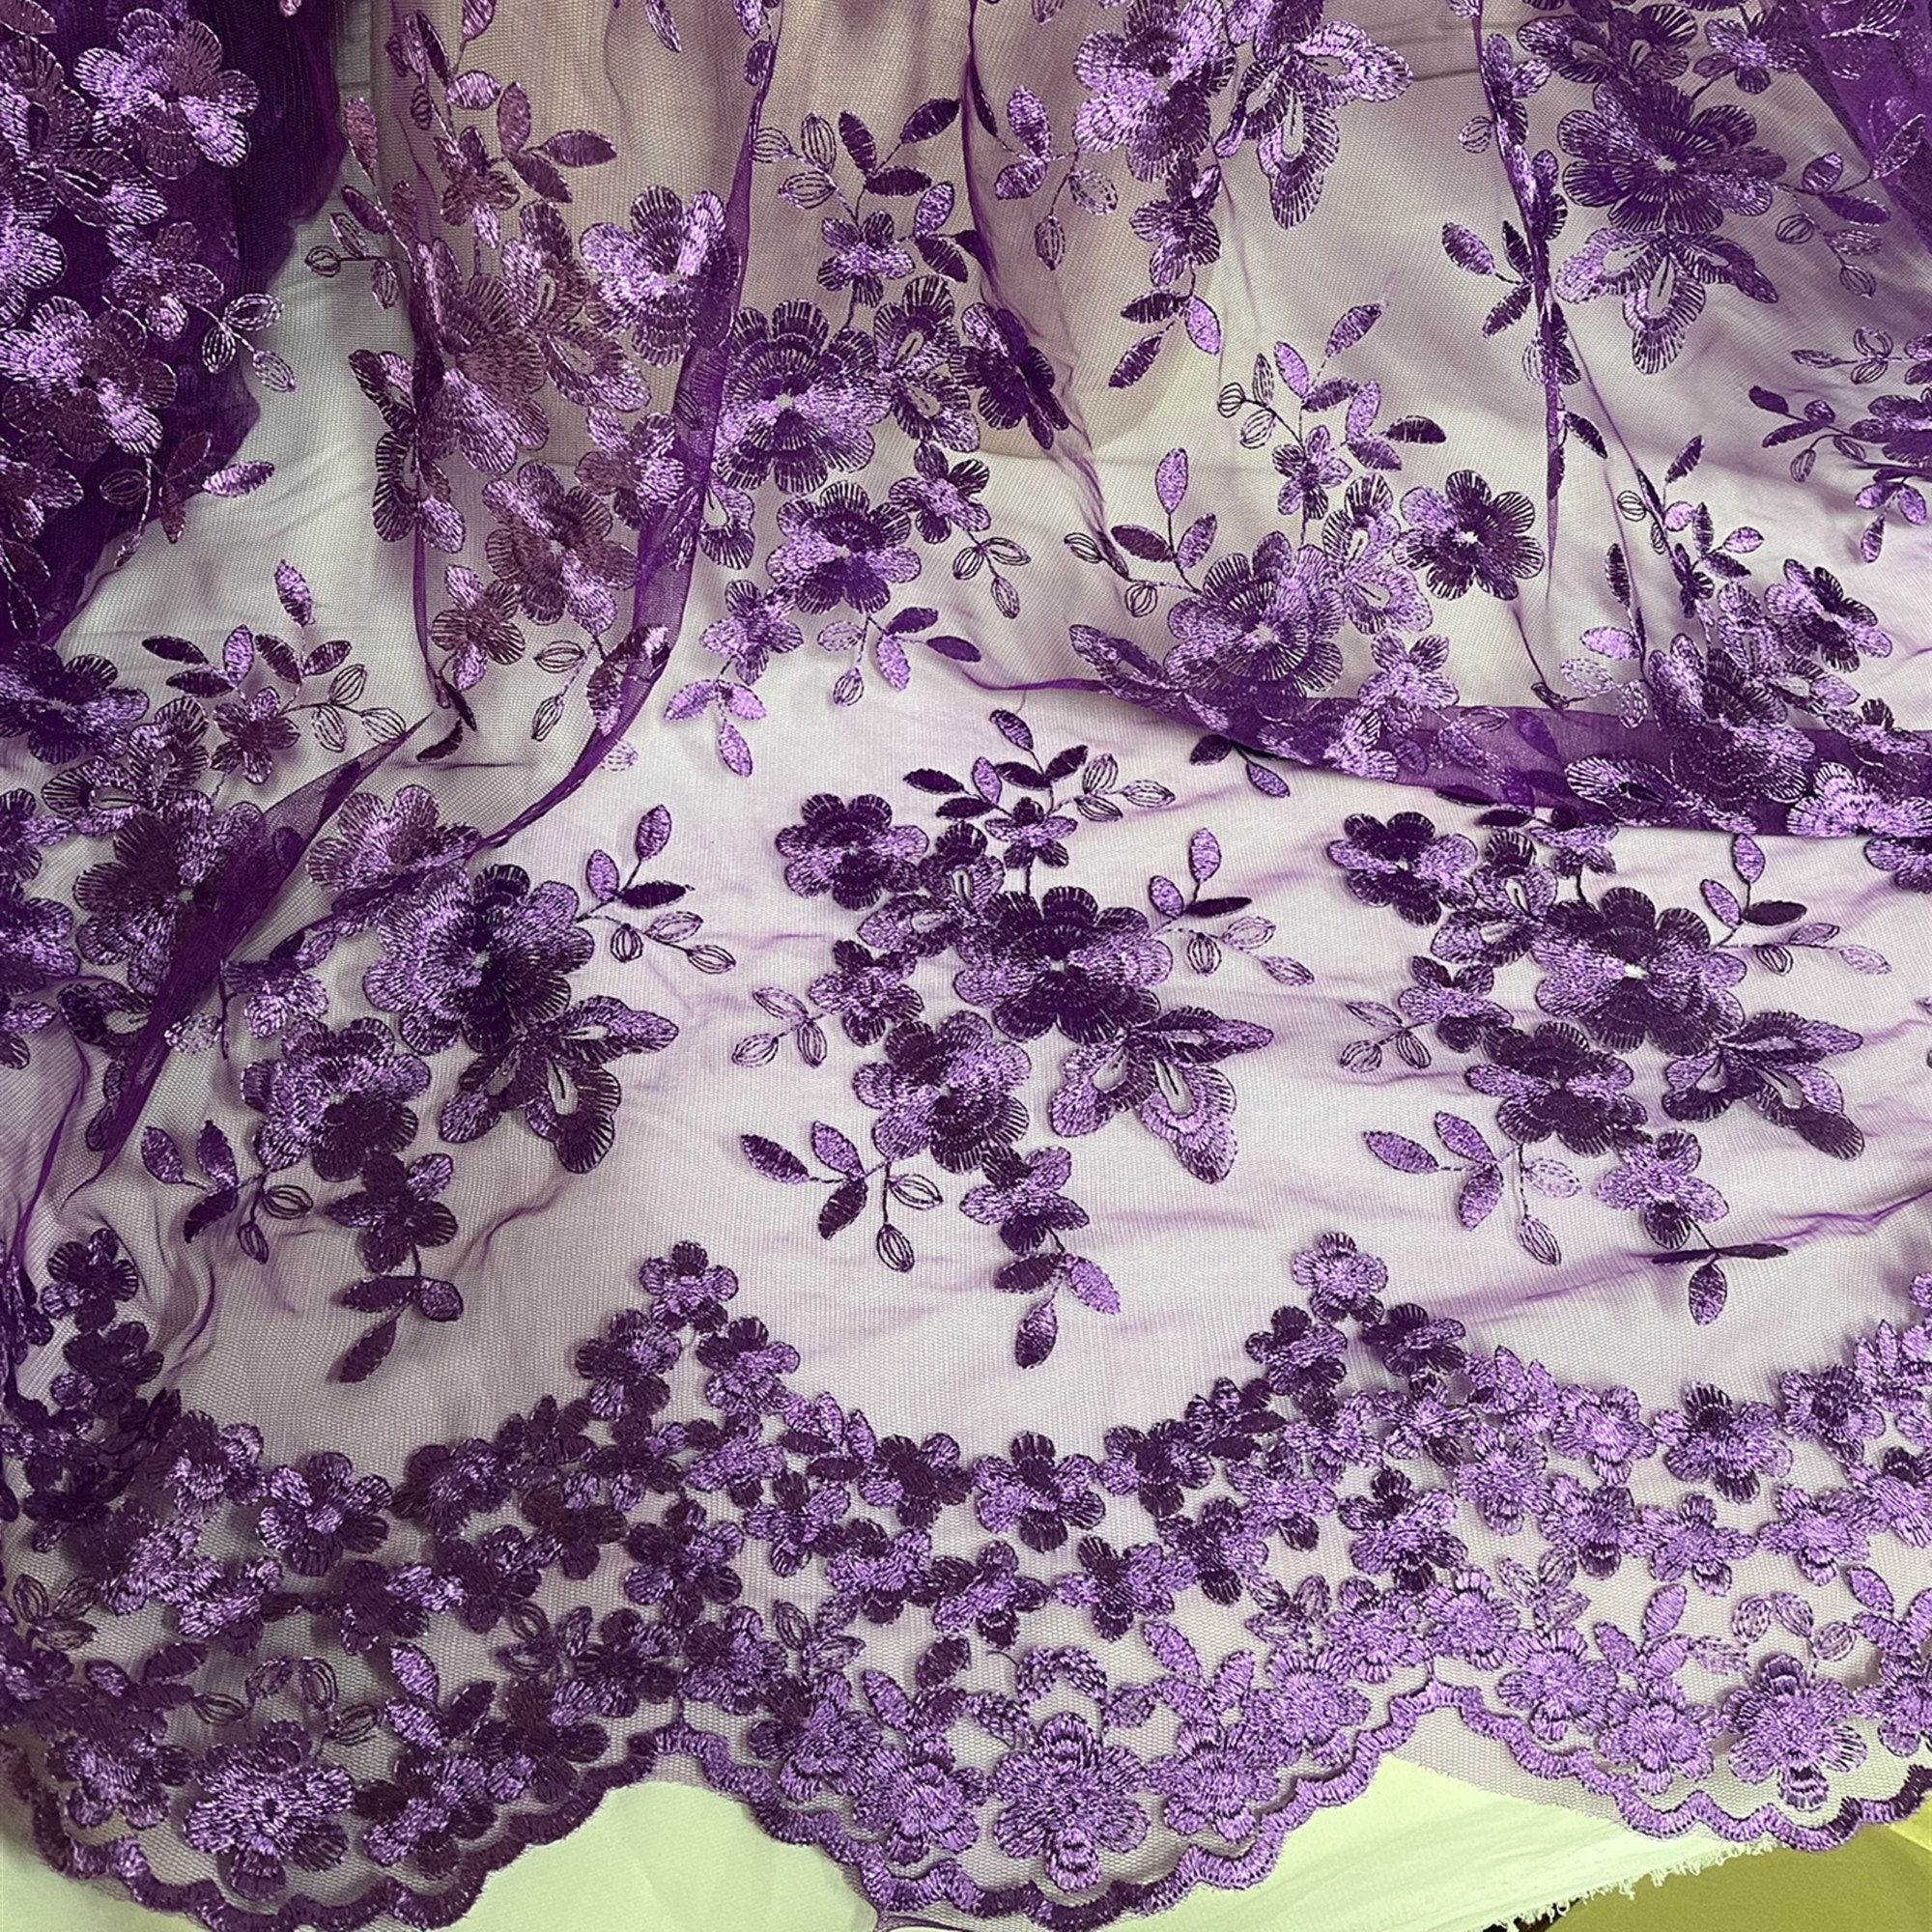 Purple Lace Fabric Floral Flower Embroidered Lace Fabric | Etsy